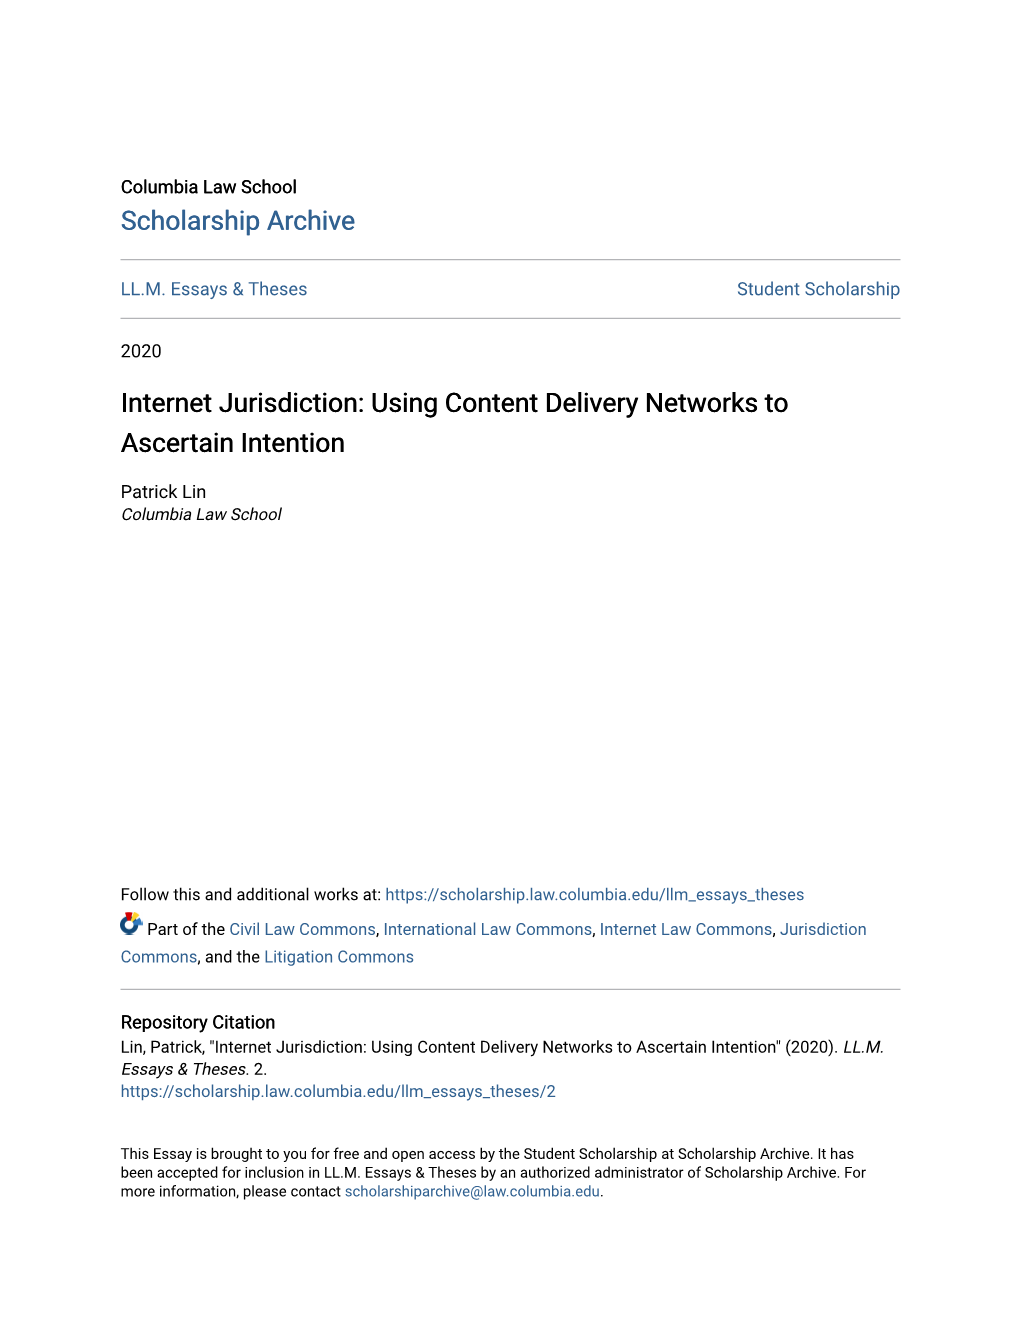 Using Content Delivery Networks to Ascertain Intention